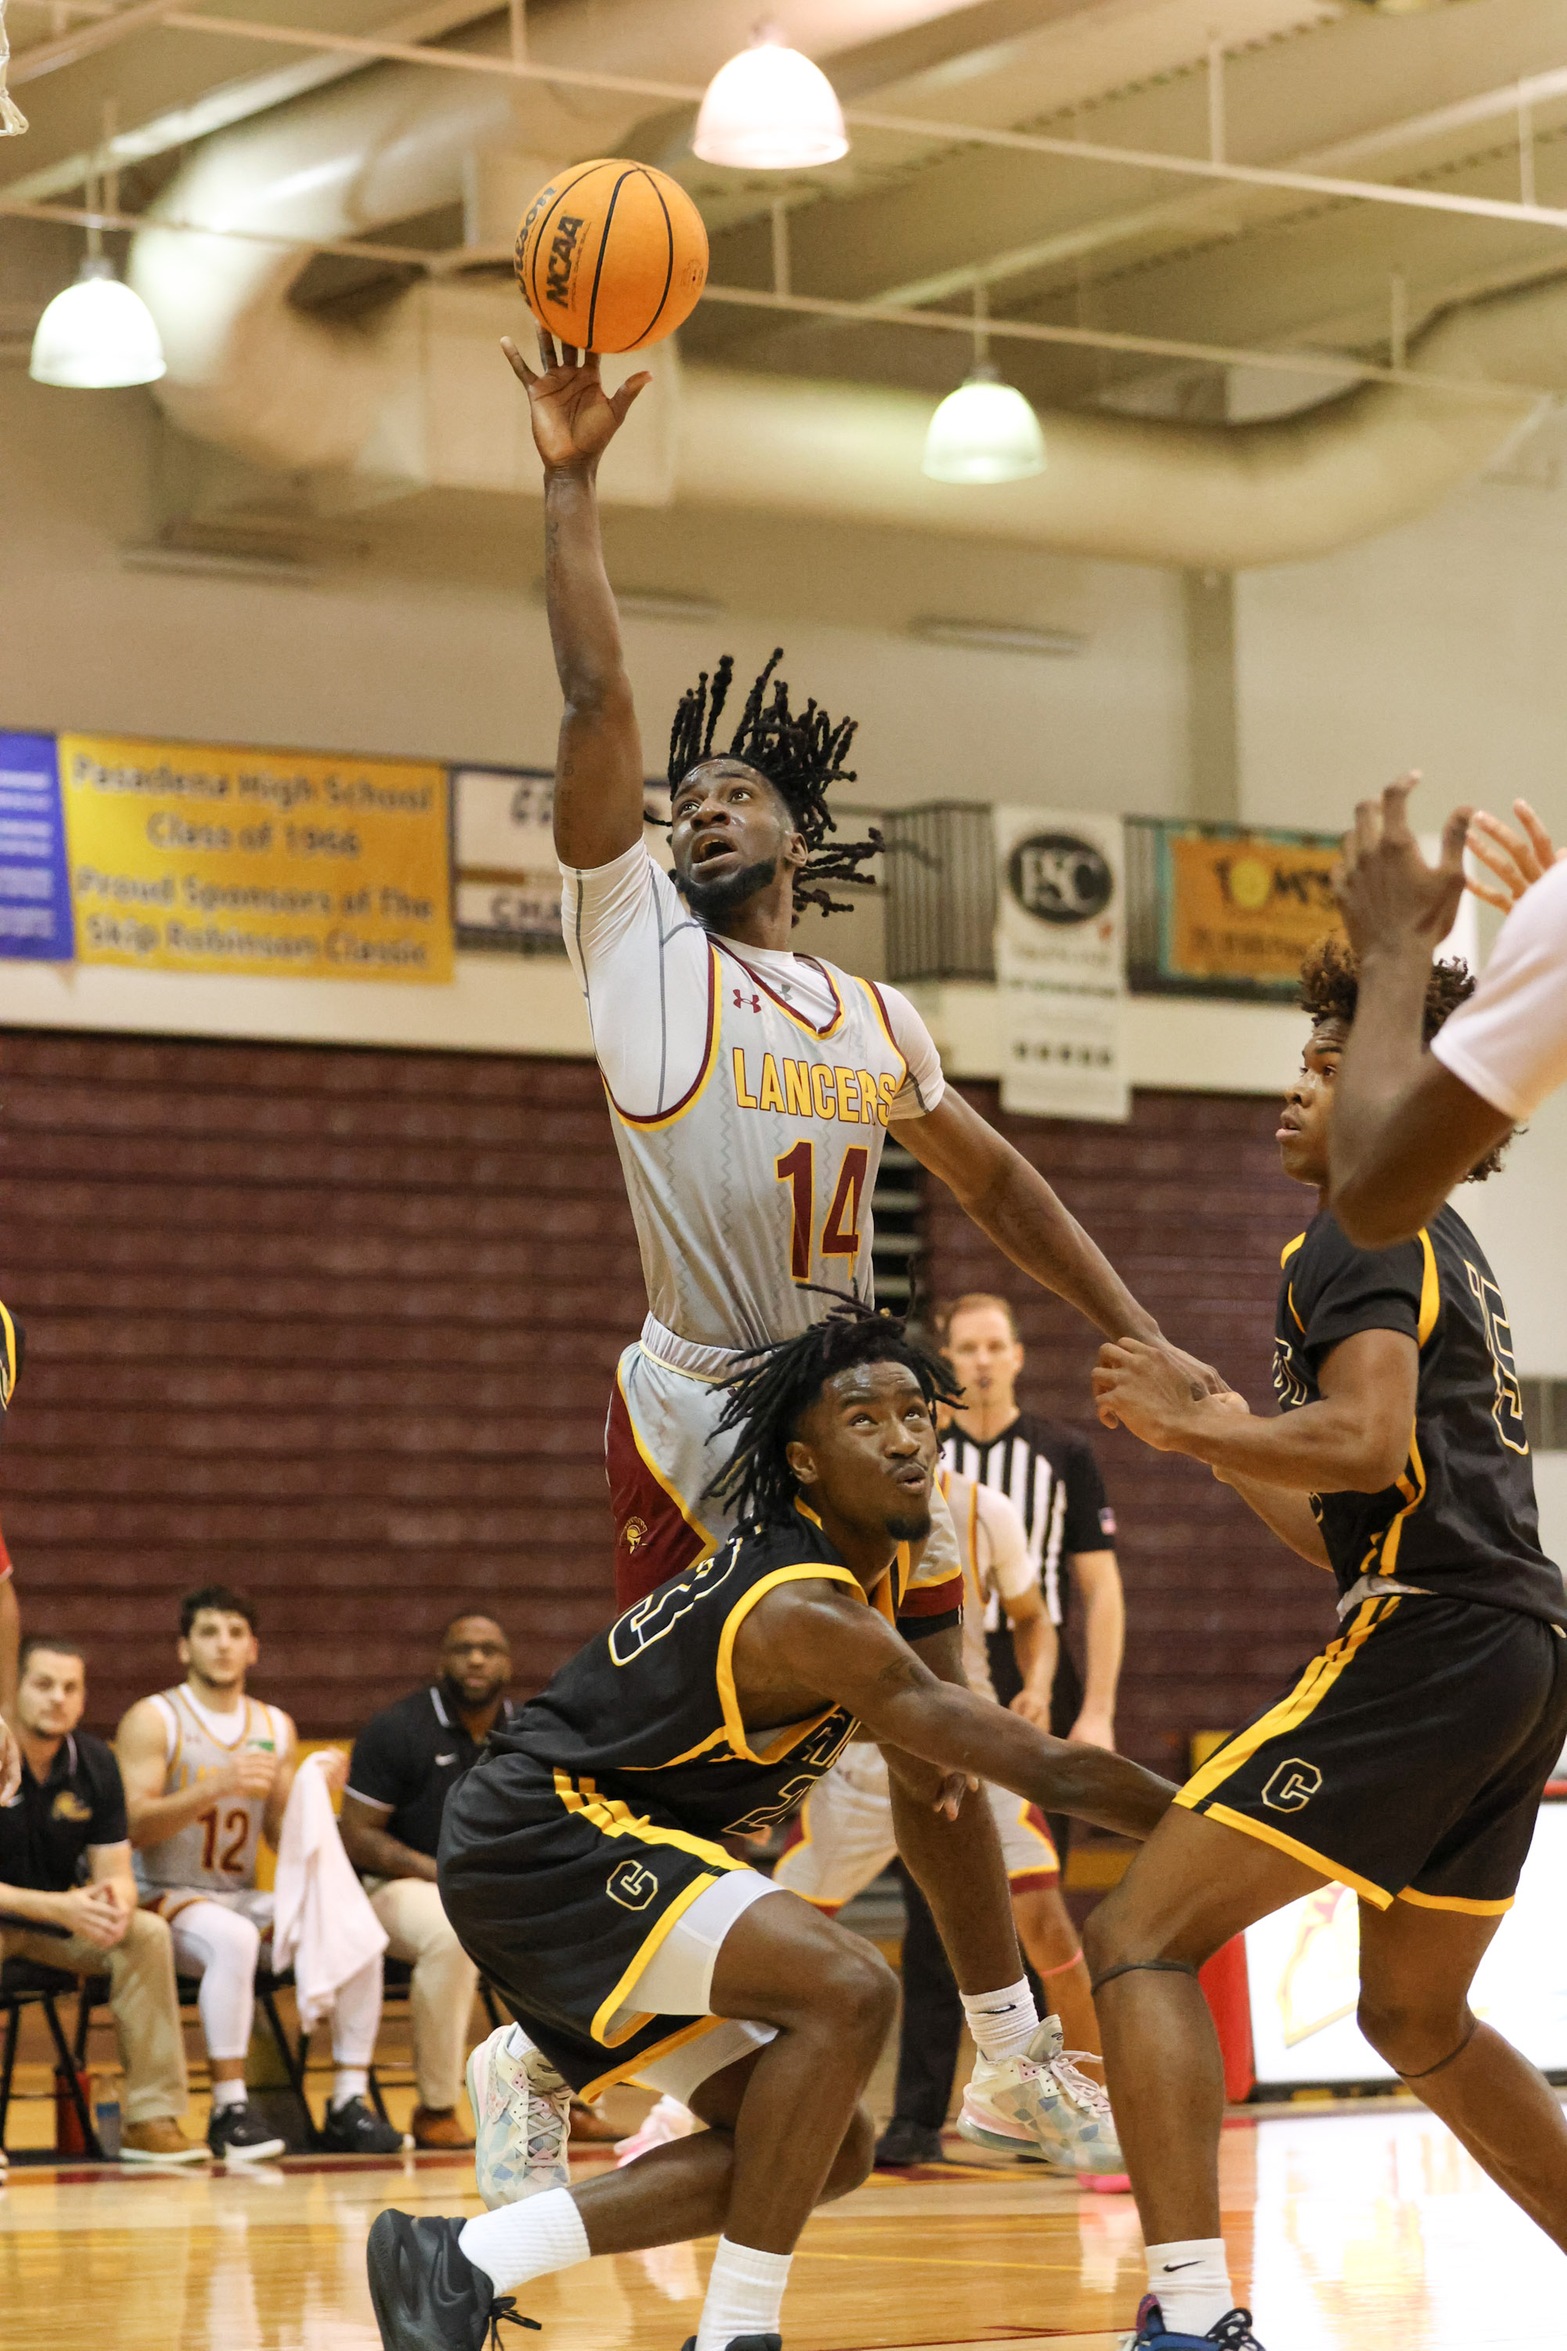 Deen Abdur-Rahmann helped PCC to second place at the SRJC tourney (photo by Richard Quinton).